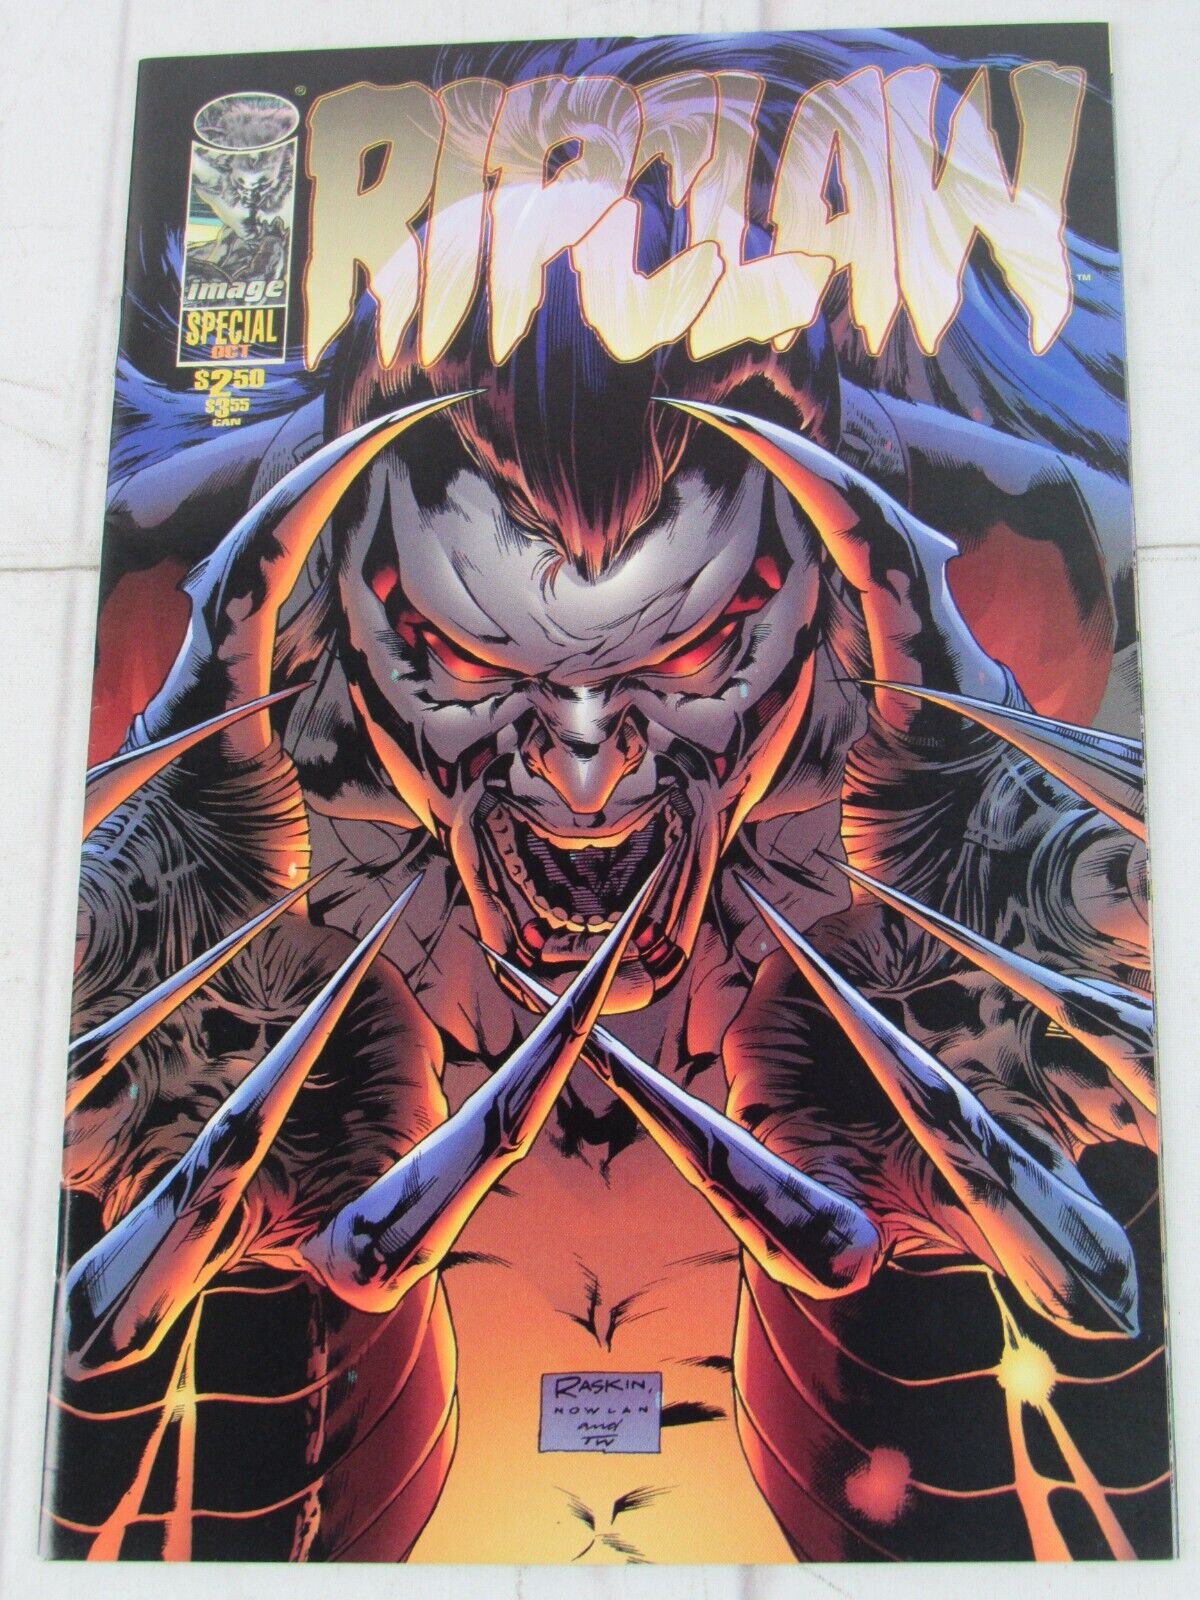 Ripclaw Special #1 Oct. 1995 Image Comics